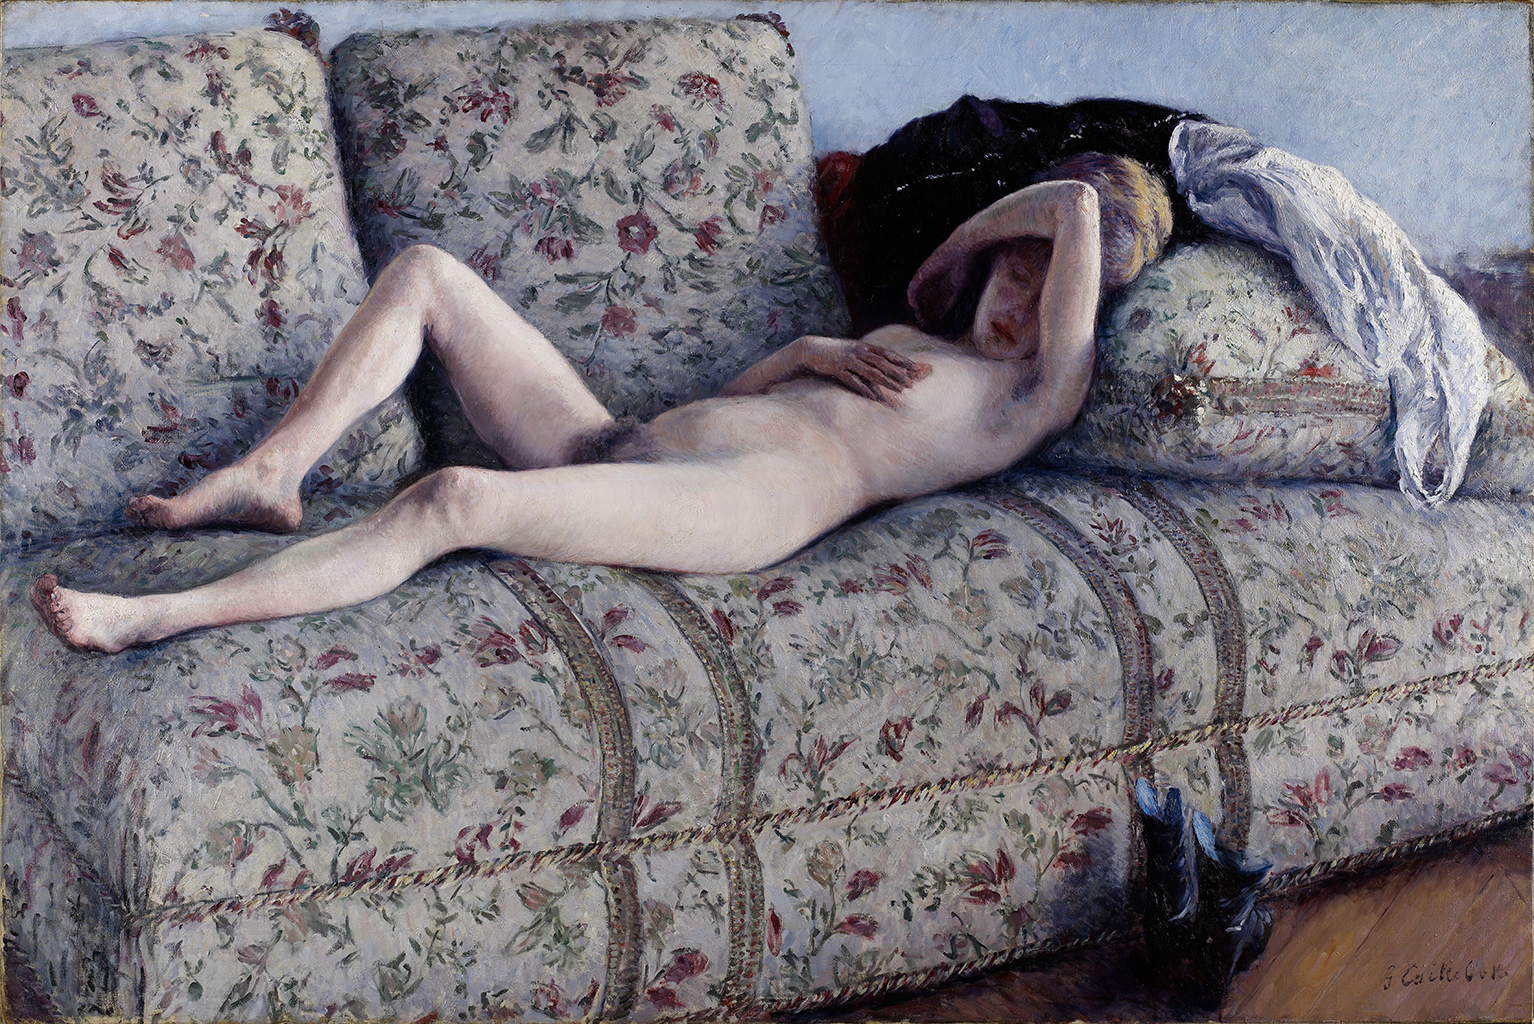 A painting depicting a nude woman laying on a white sofa with floral designs. Her right-hand lays on her chest while her left arm covers the top of her face. Her head rests against a pillow and what seems to be clothing. There are black boots on the wooden floor next to the sofa.